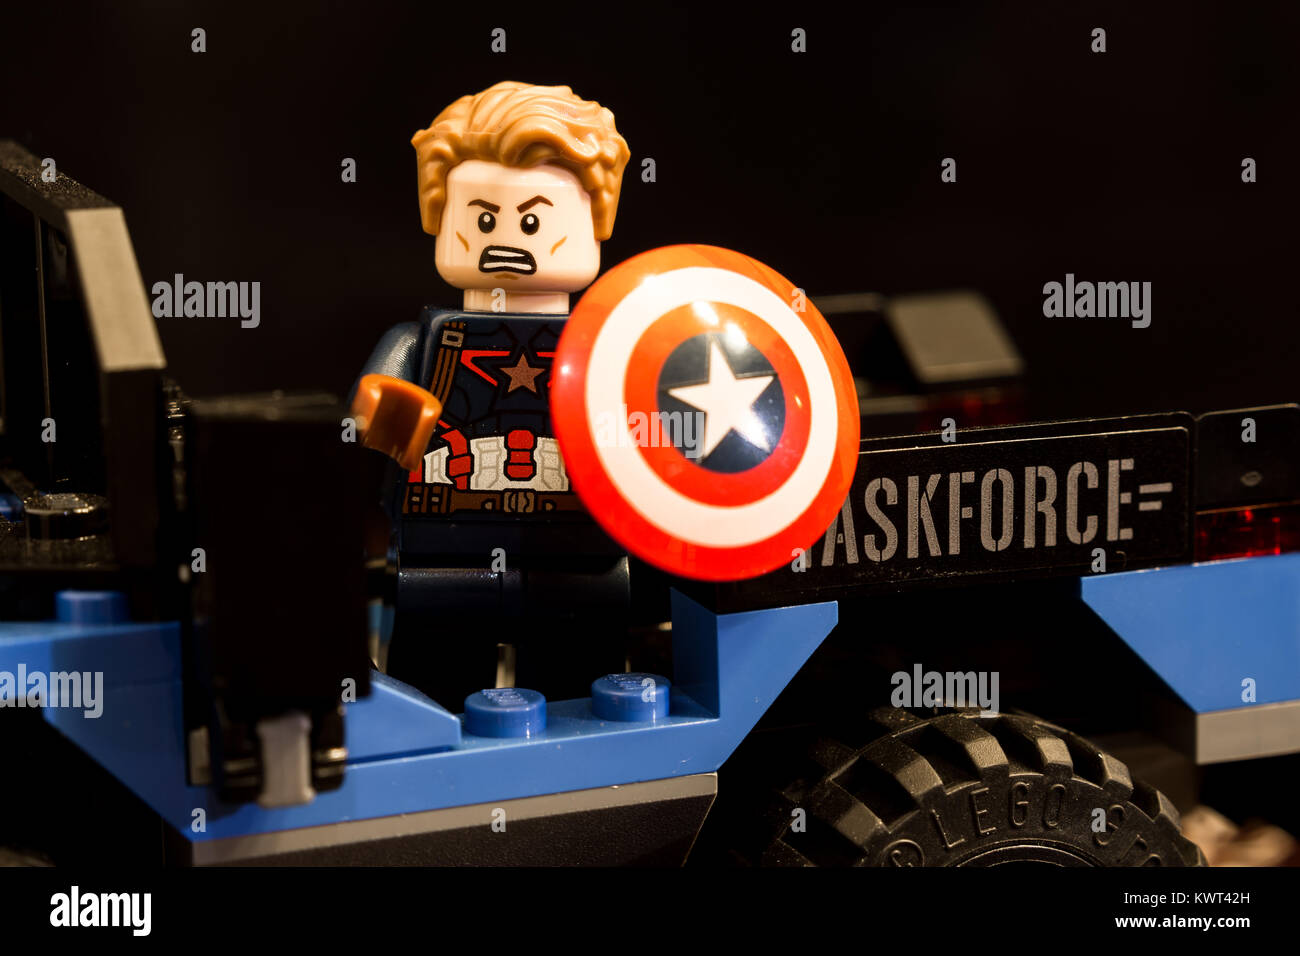 Lego Captain America High Resolution Stock Photography and Images - Alamy